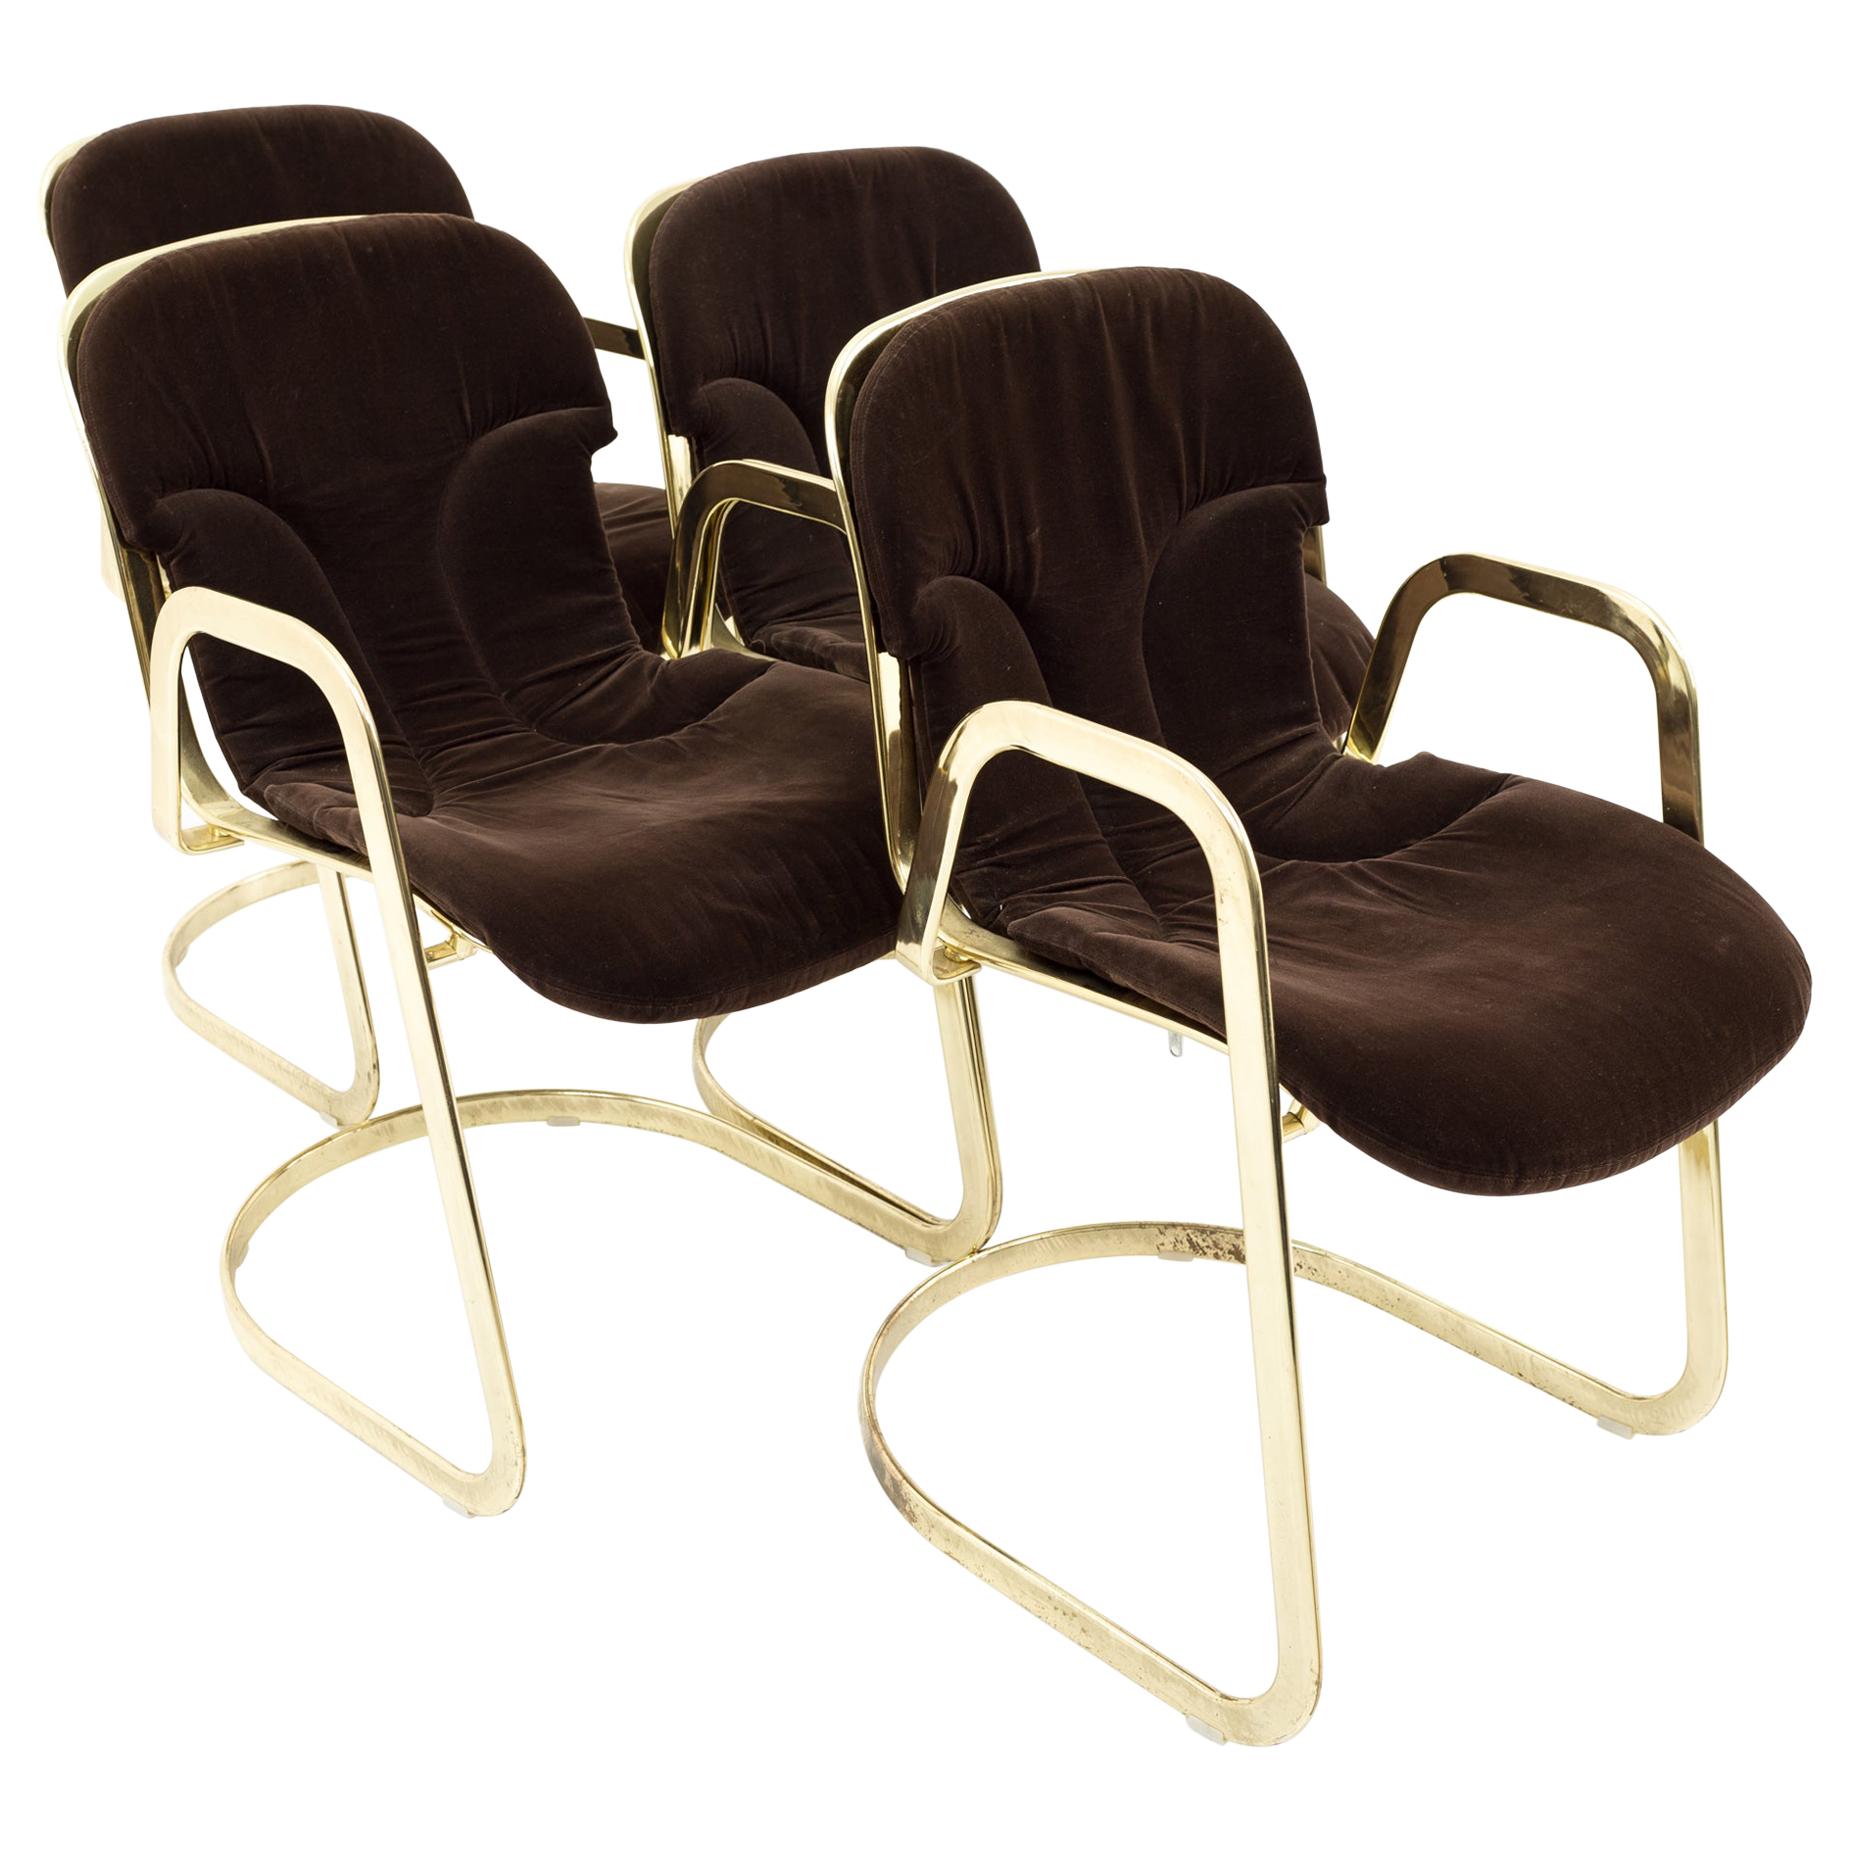 Willy Rizzo for Cidue Mid Century Italian Brass Cantilever Chair, Set of 4